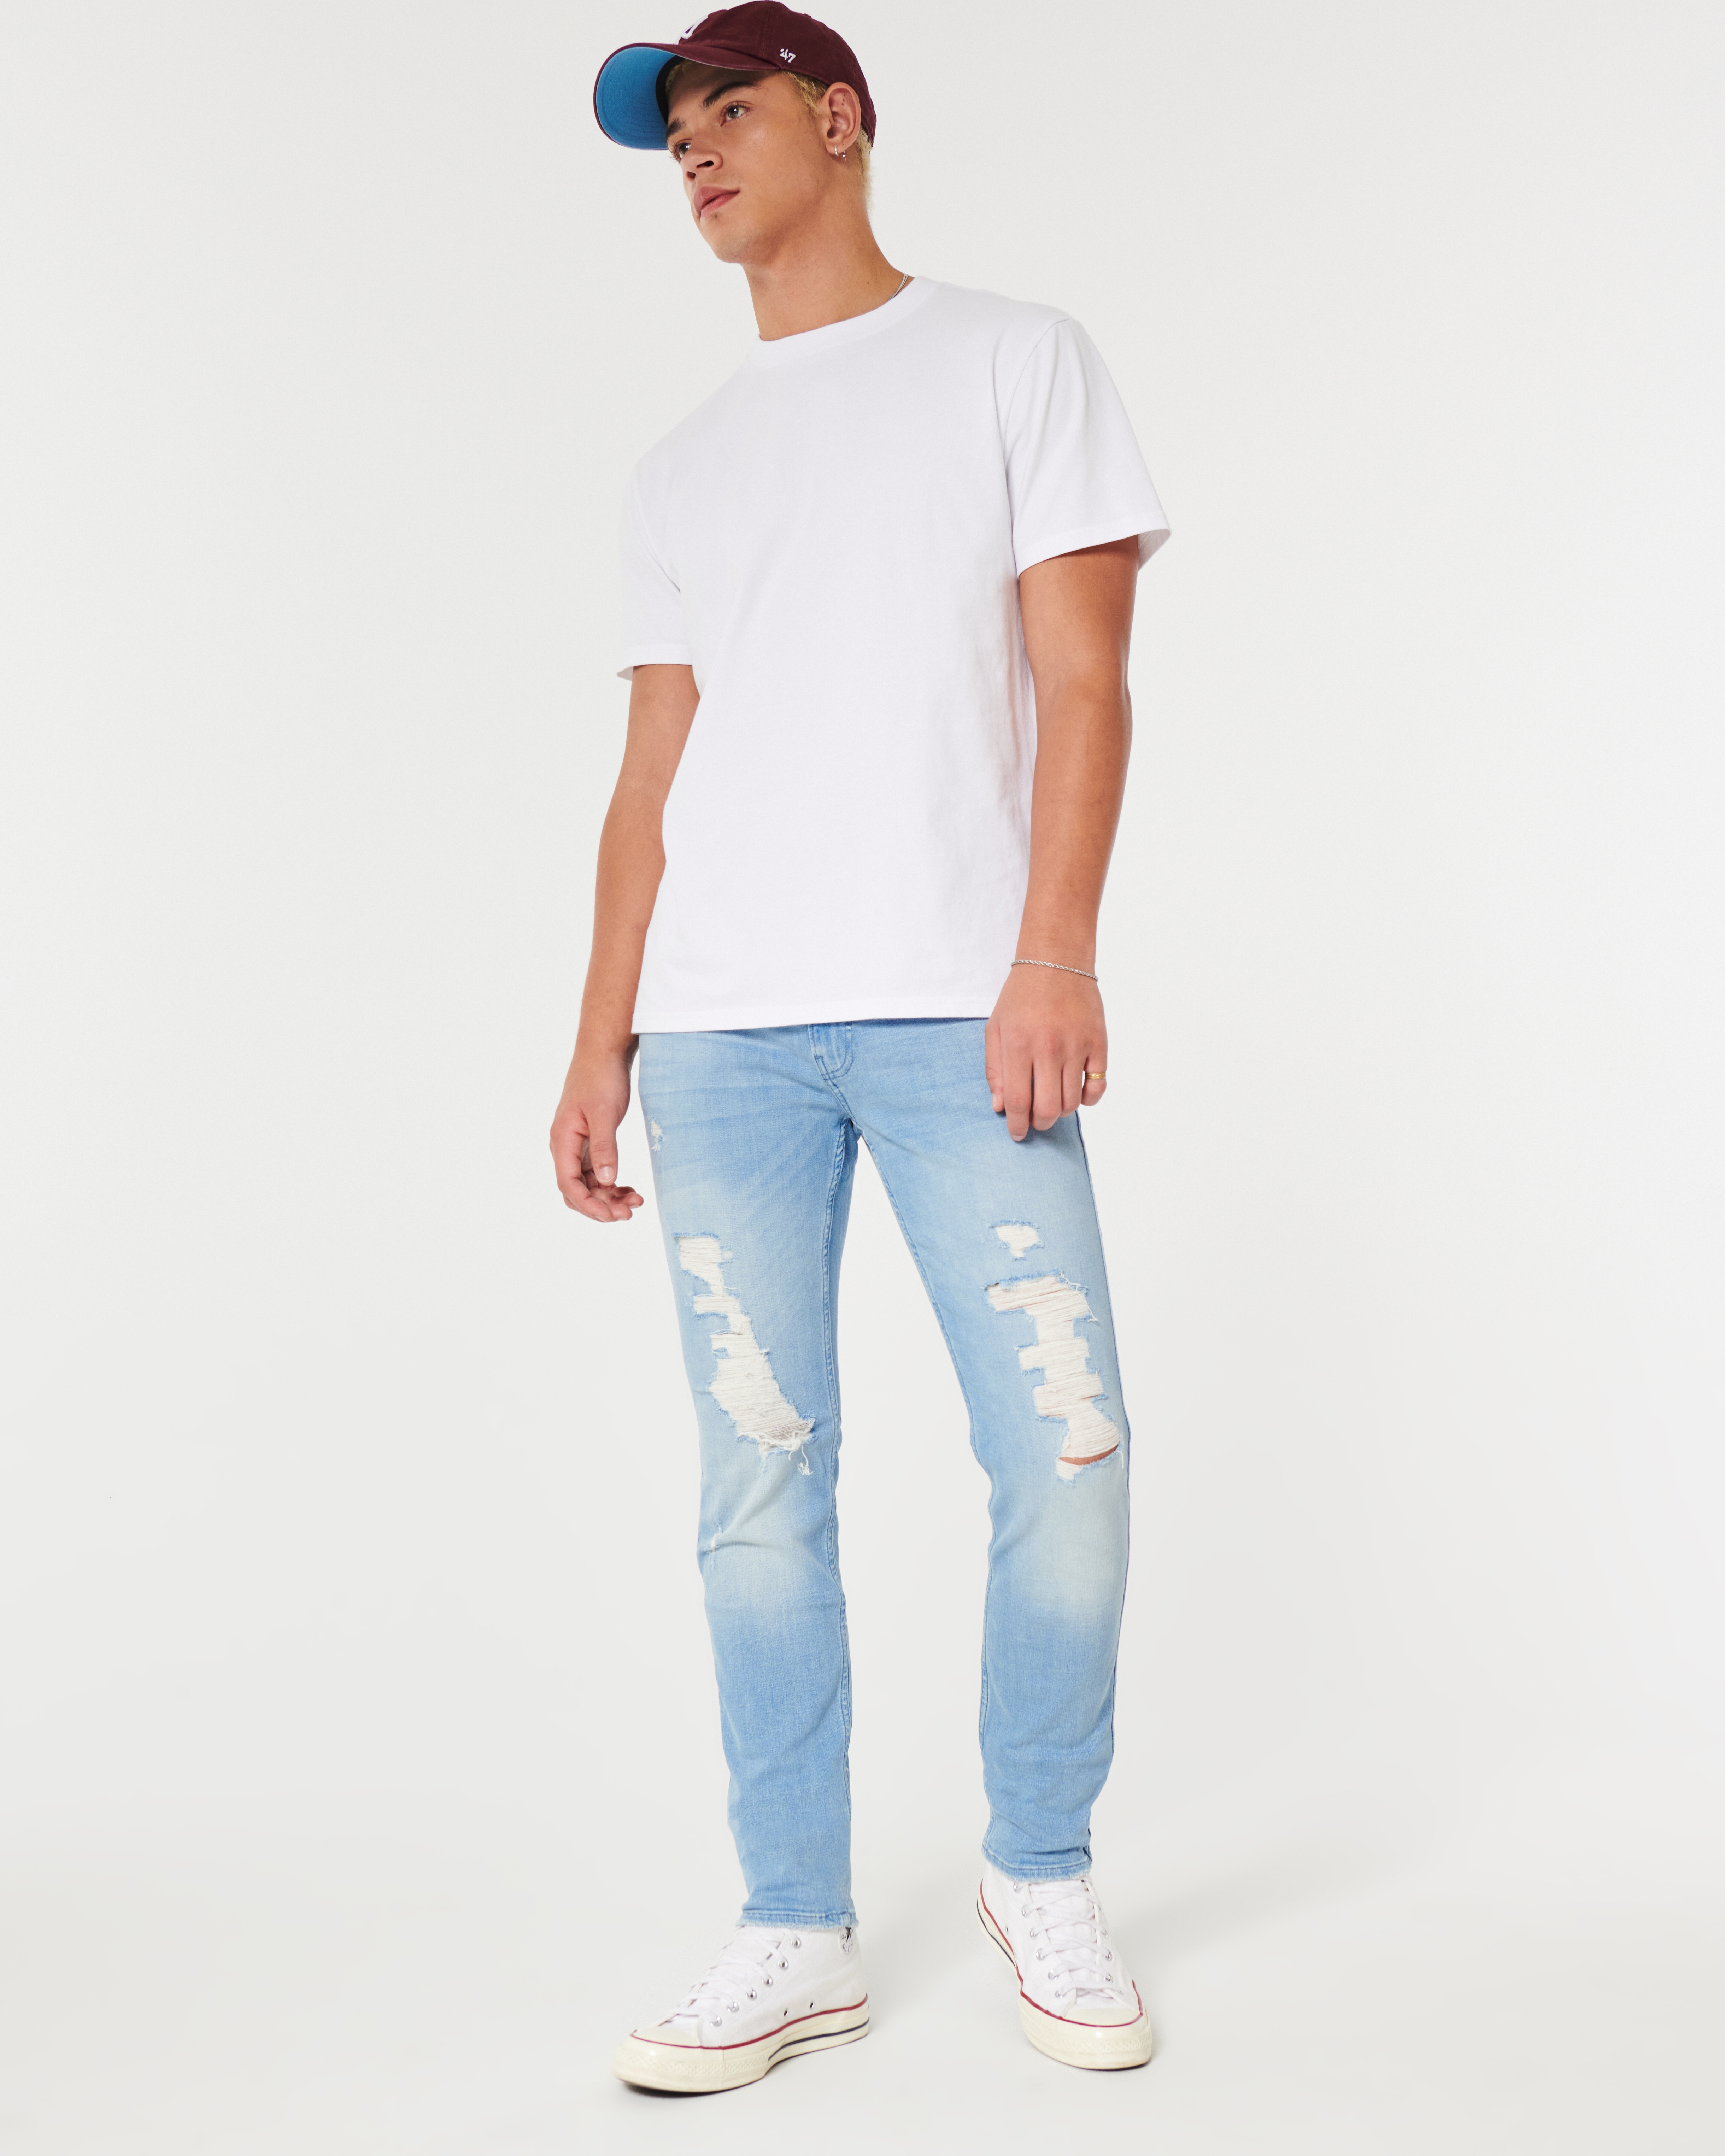 Ripped Light Wash Skinny Jeans